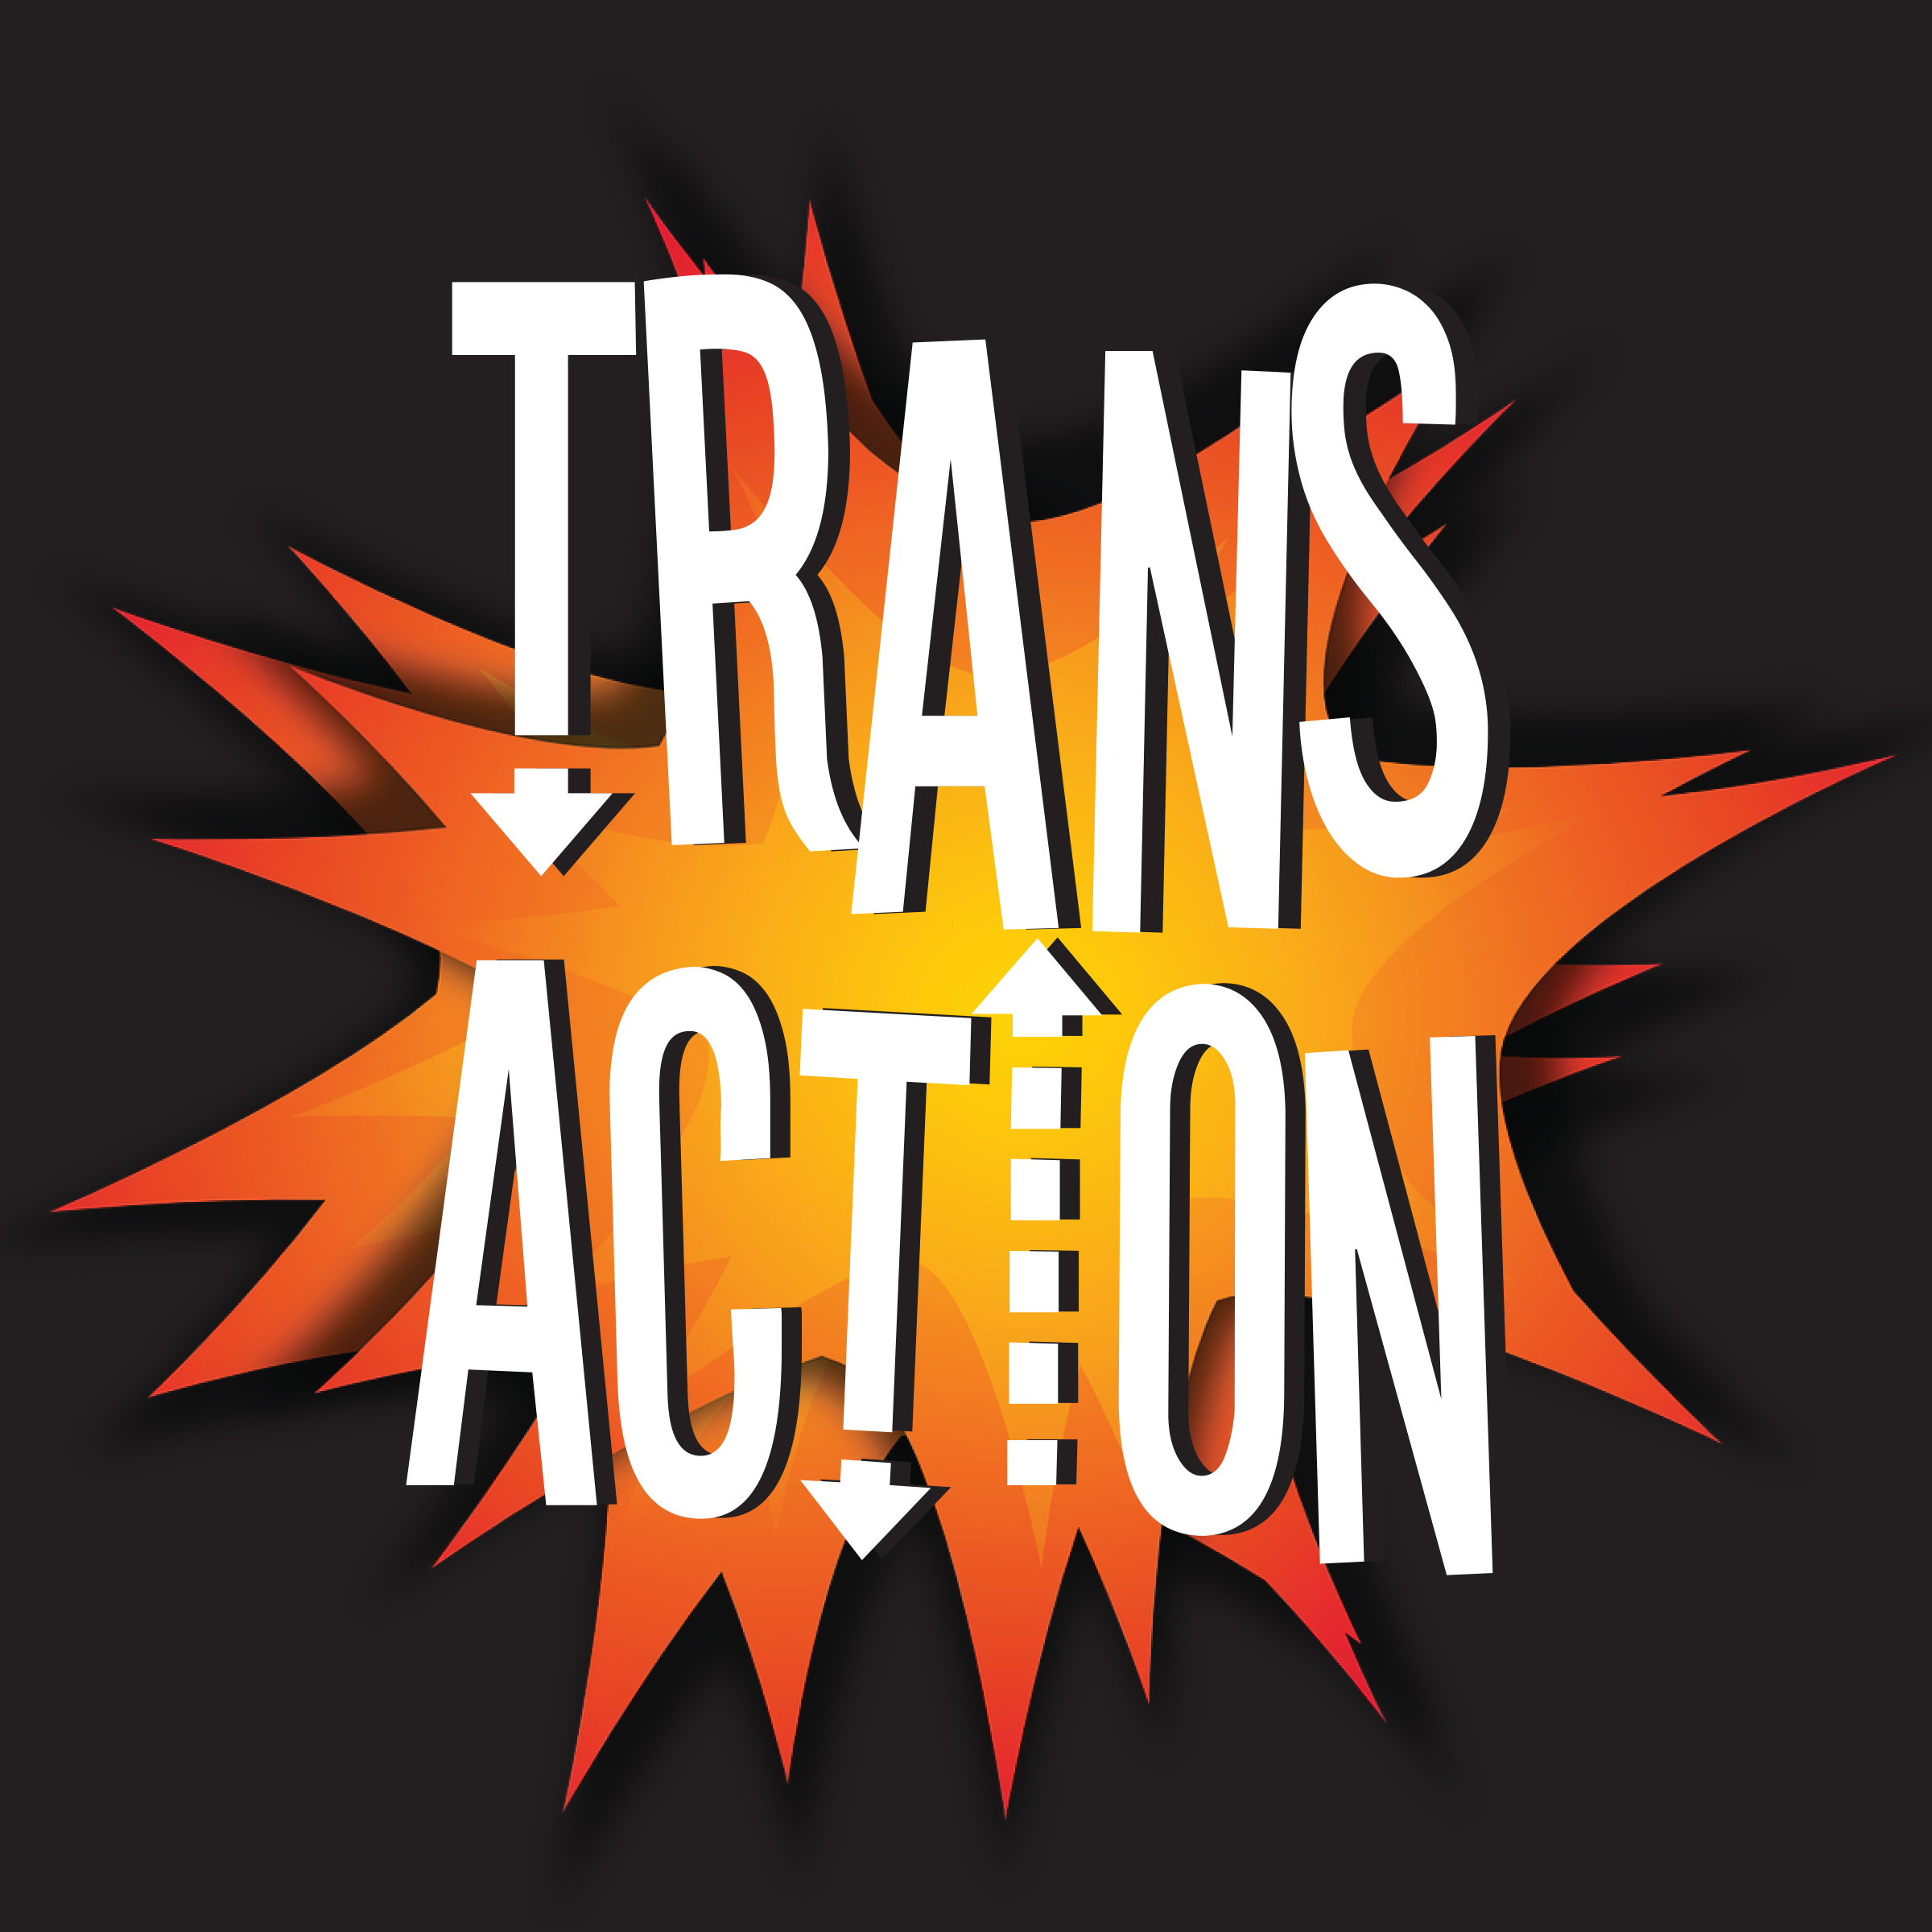 Art for TRANS ACTION by TransAction02